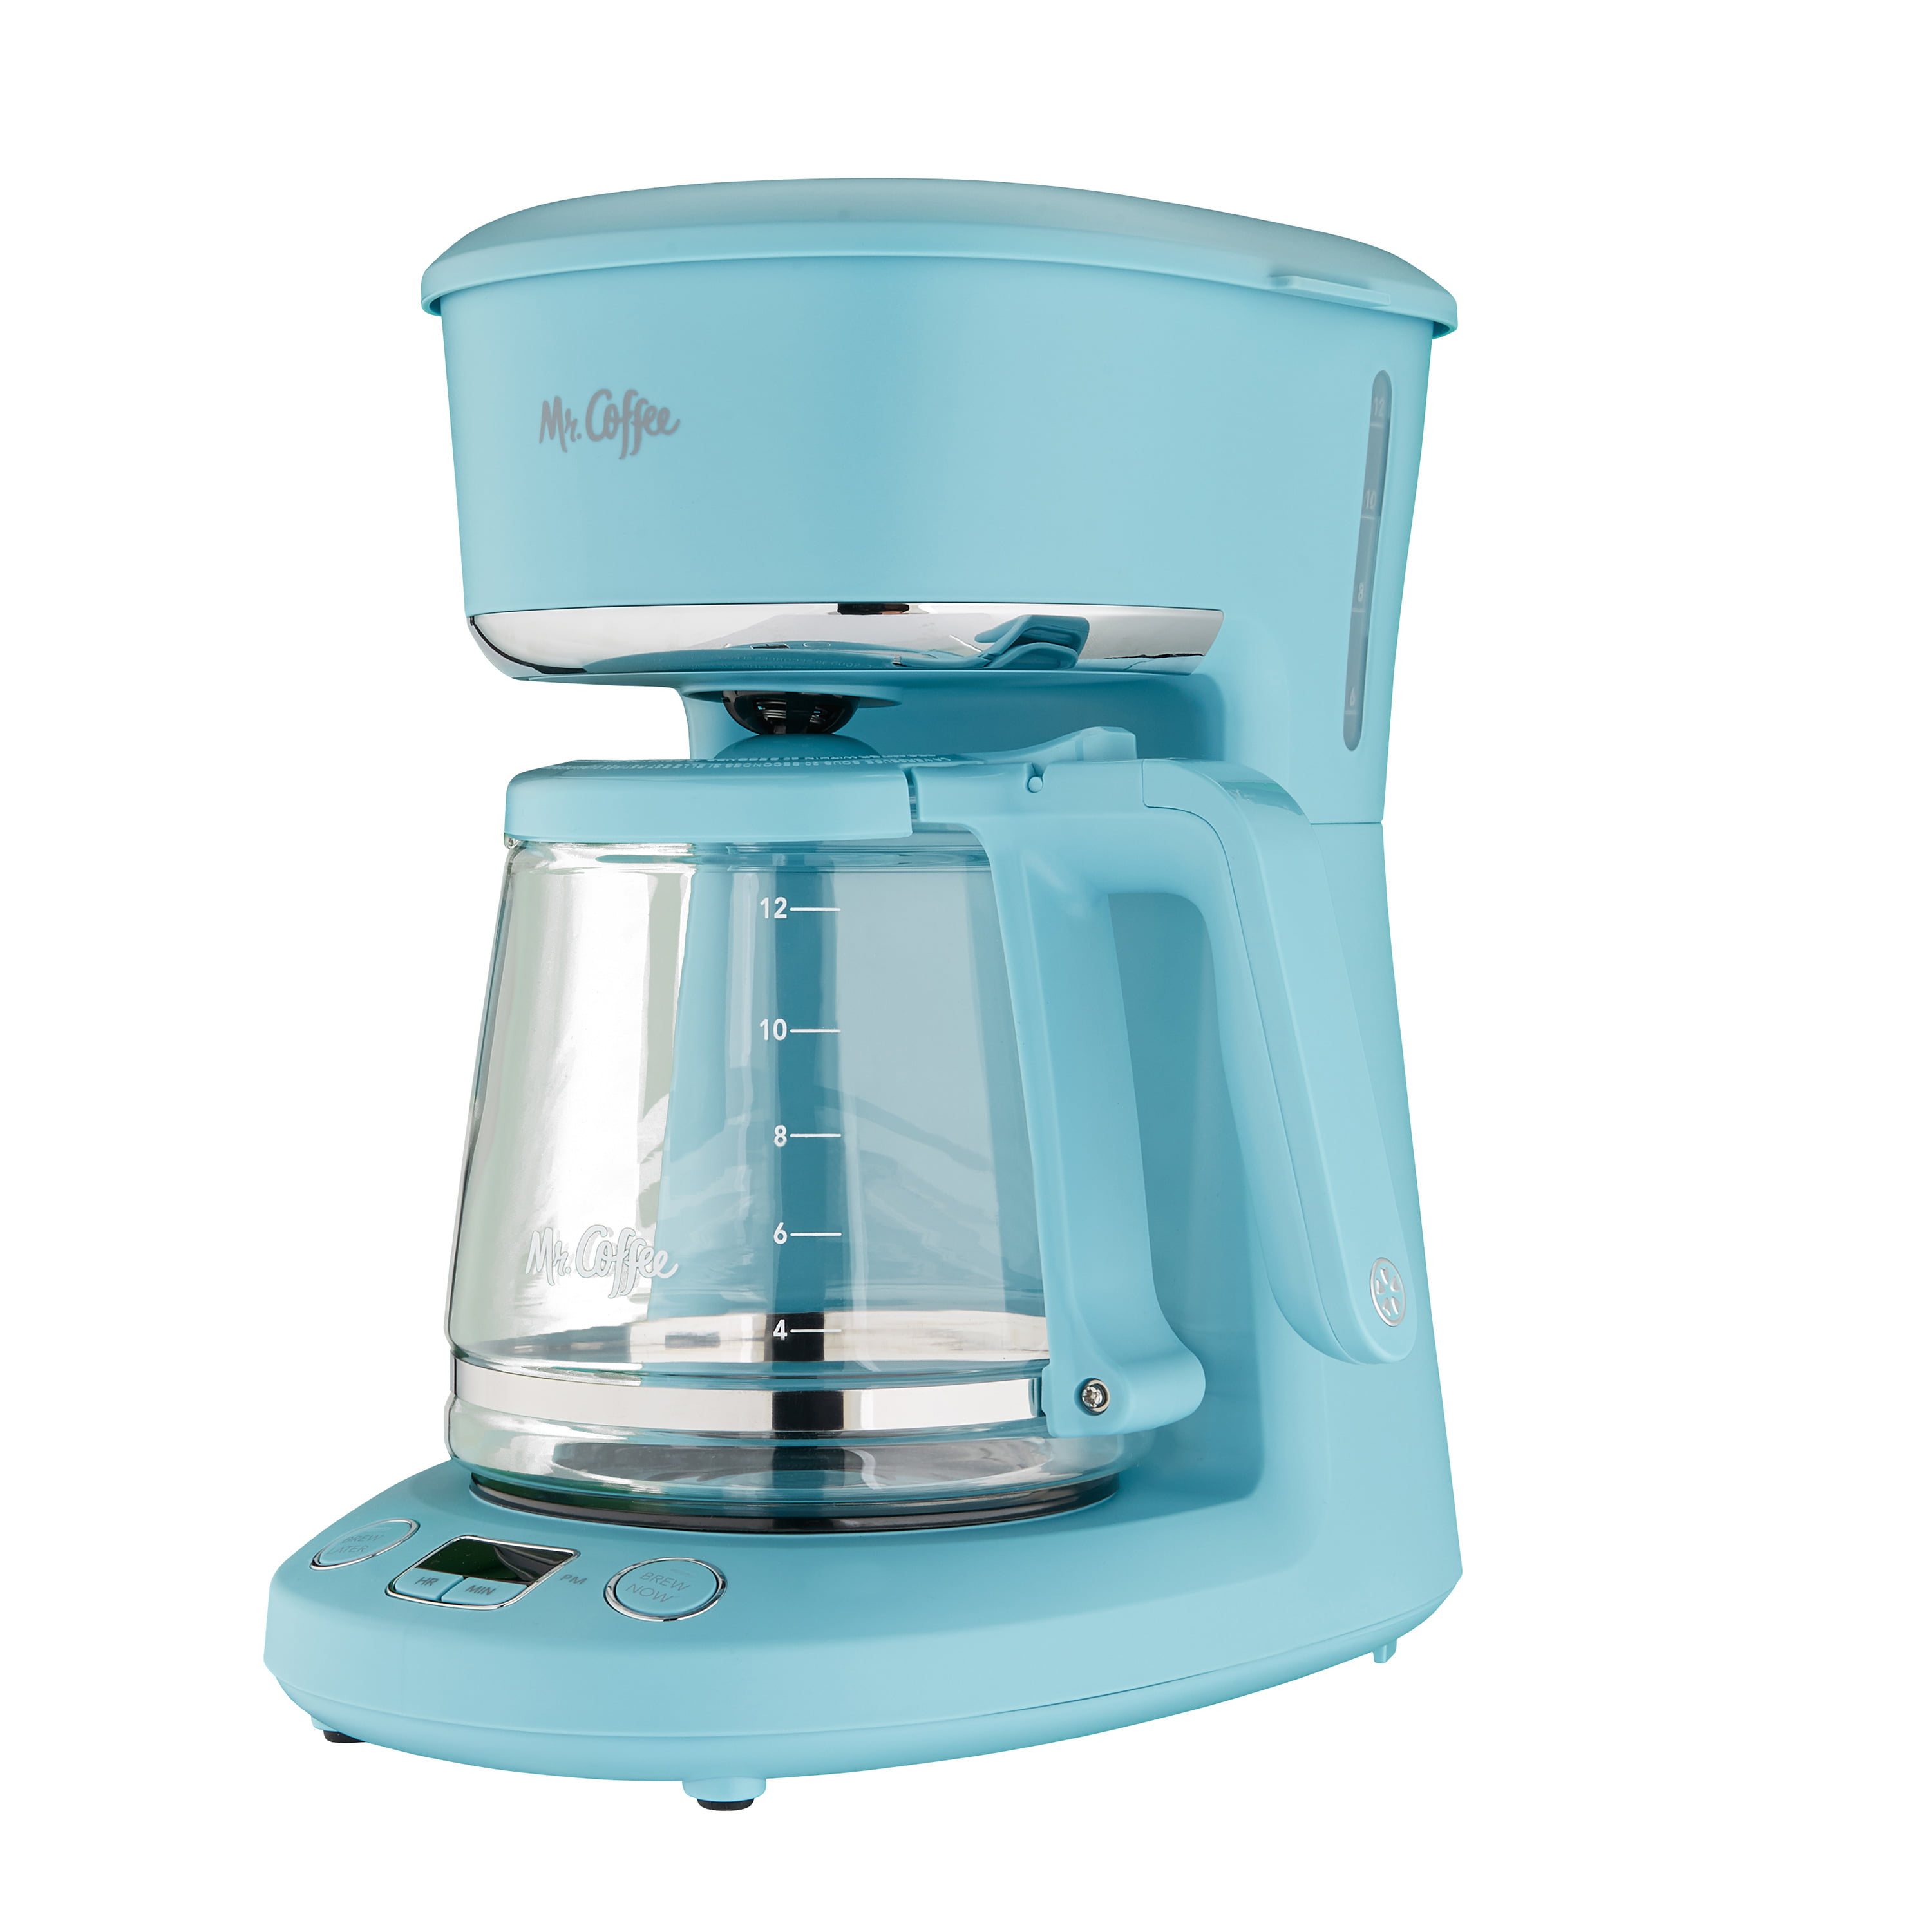 Mr. Coffee 5-Cup Programmable Coffee Maker - Artic Blue